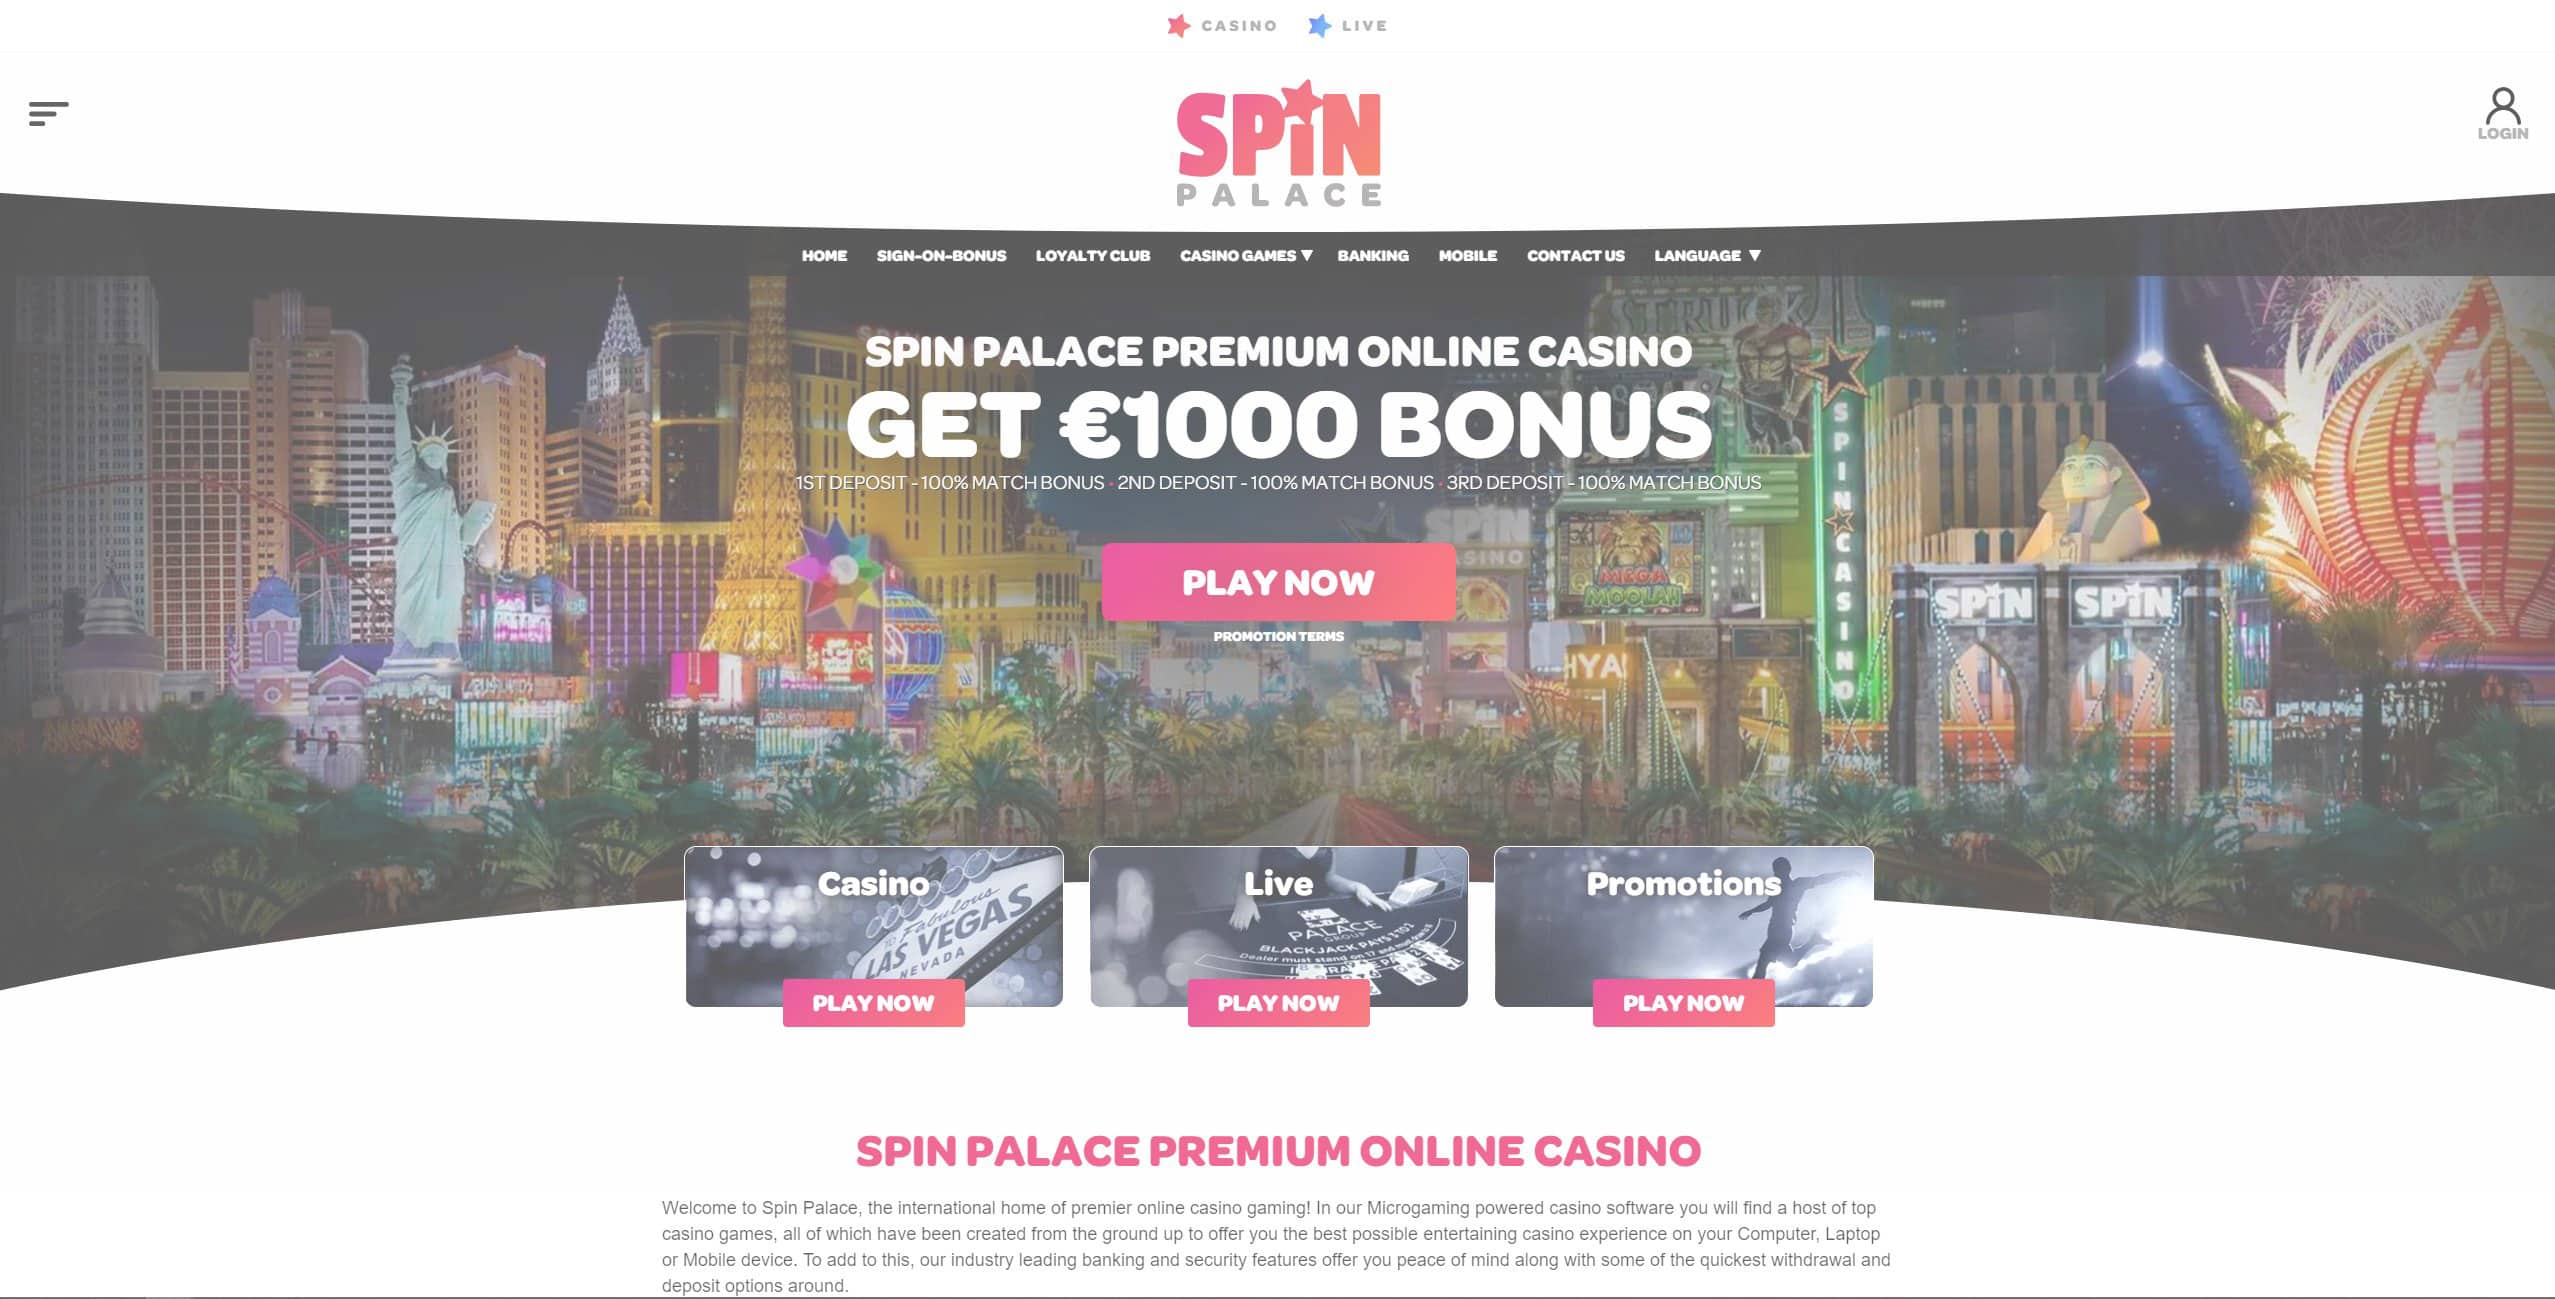 spin palace casino - What Can Your Learn From Your Critics